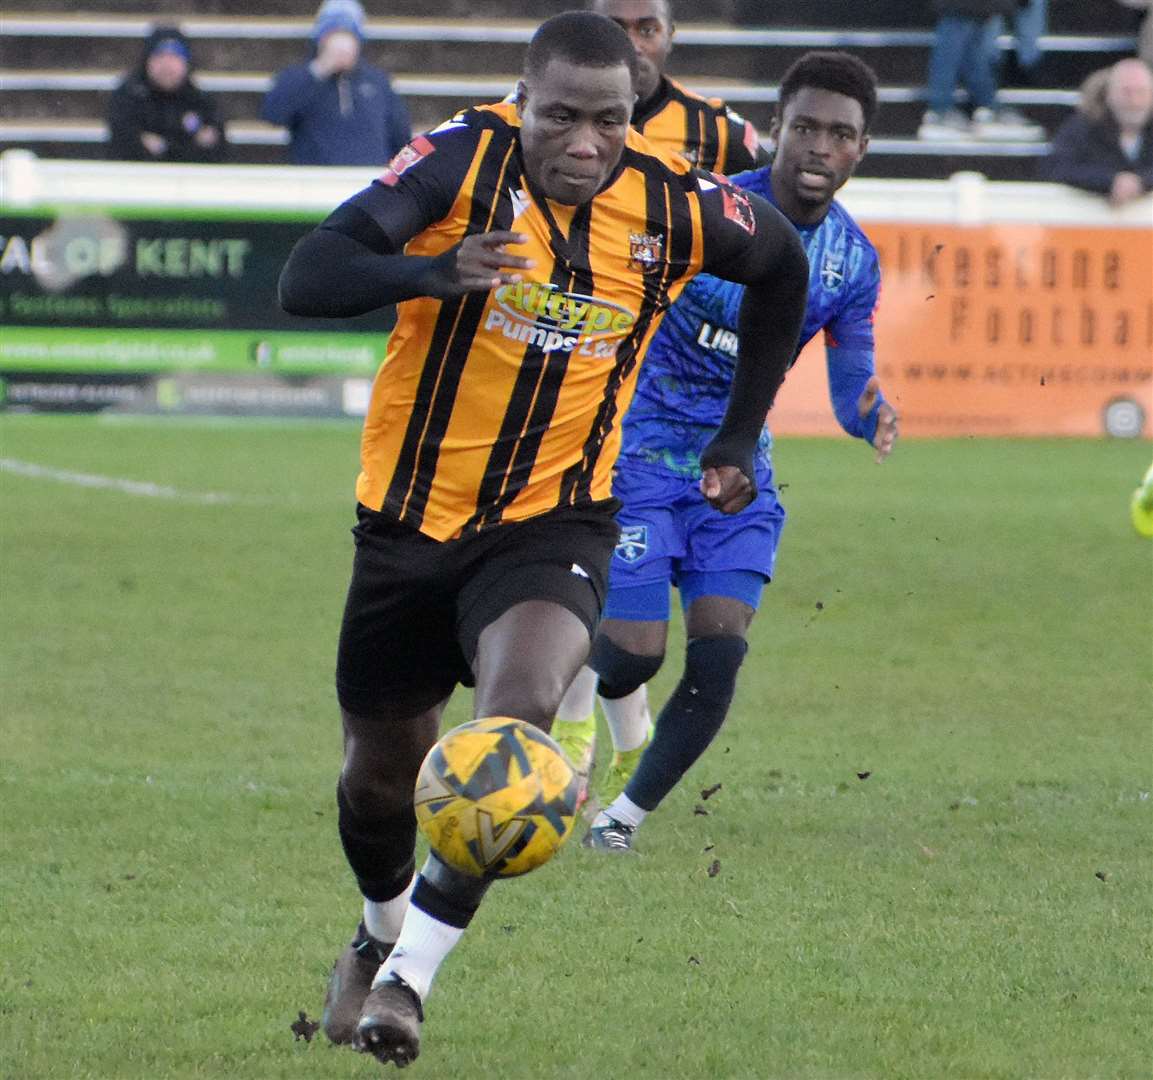 Folkestone's Ade Yusuff goes on the attack in their 4-0 derby success over Margate. Picture: Randolph File